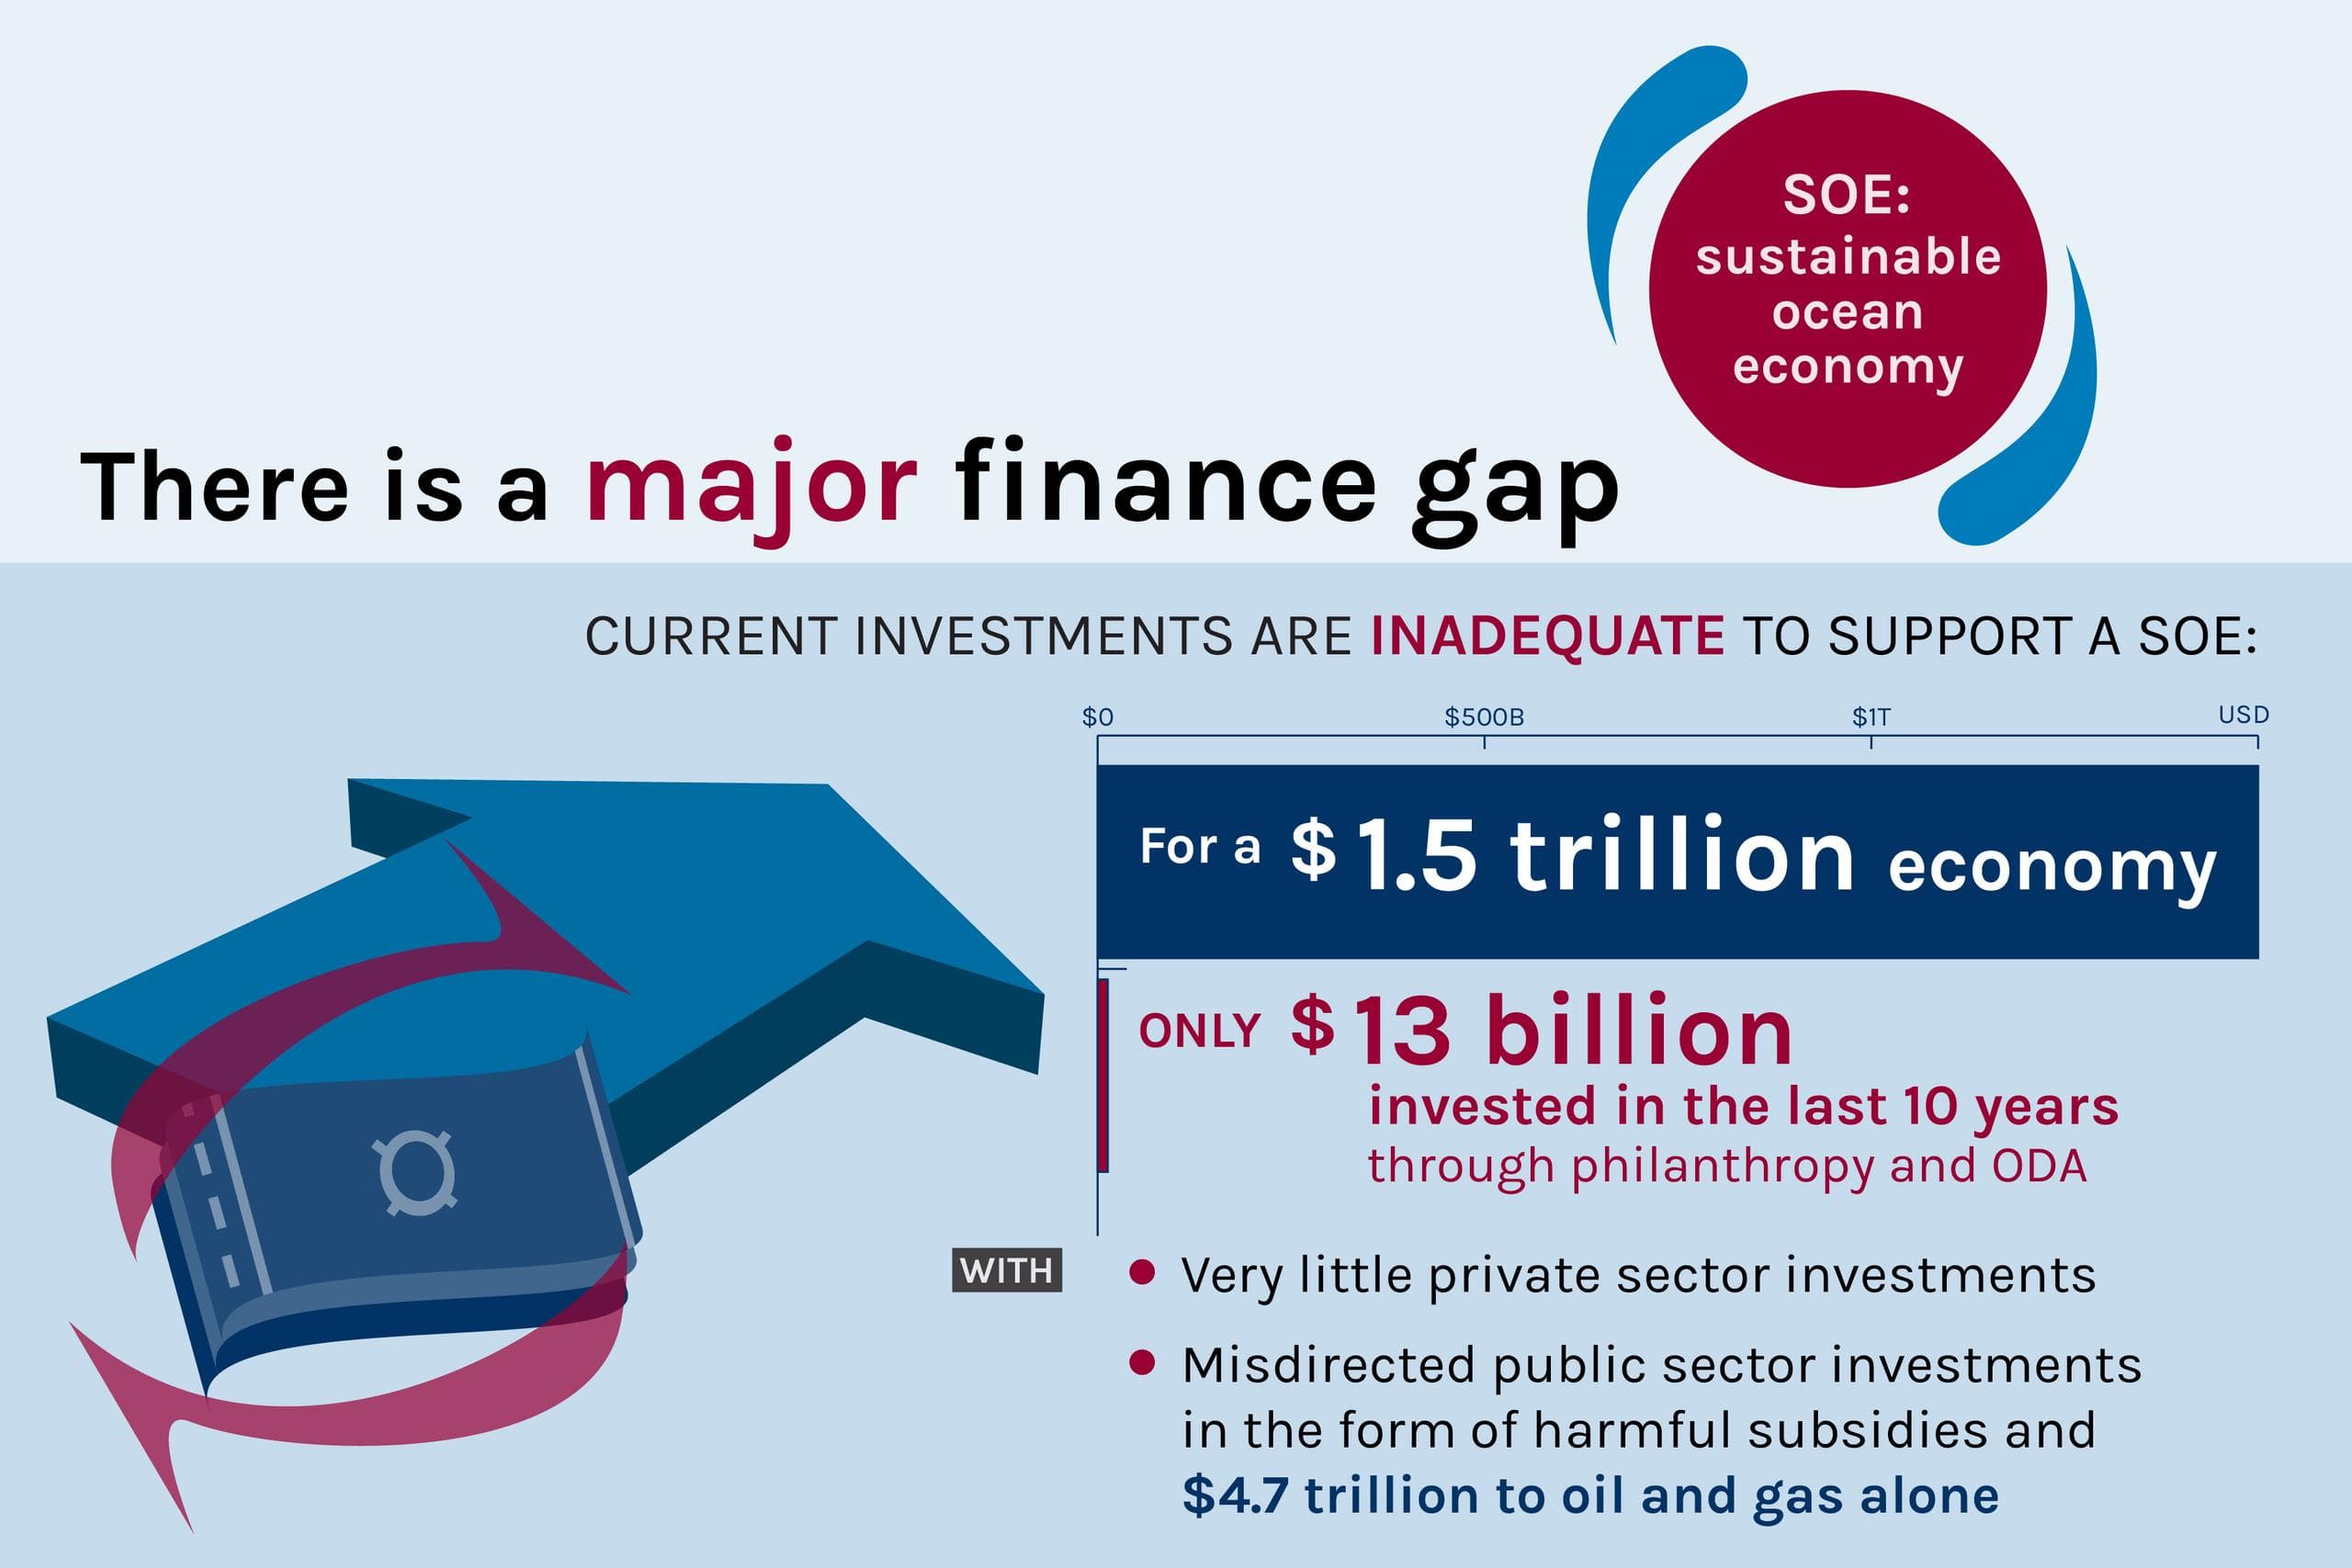 Figure: There is a major finance gap: current investments are inadequate to support a sustainable ocean economy (SOE).